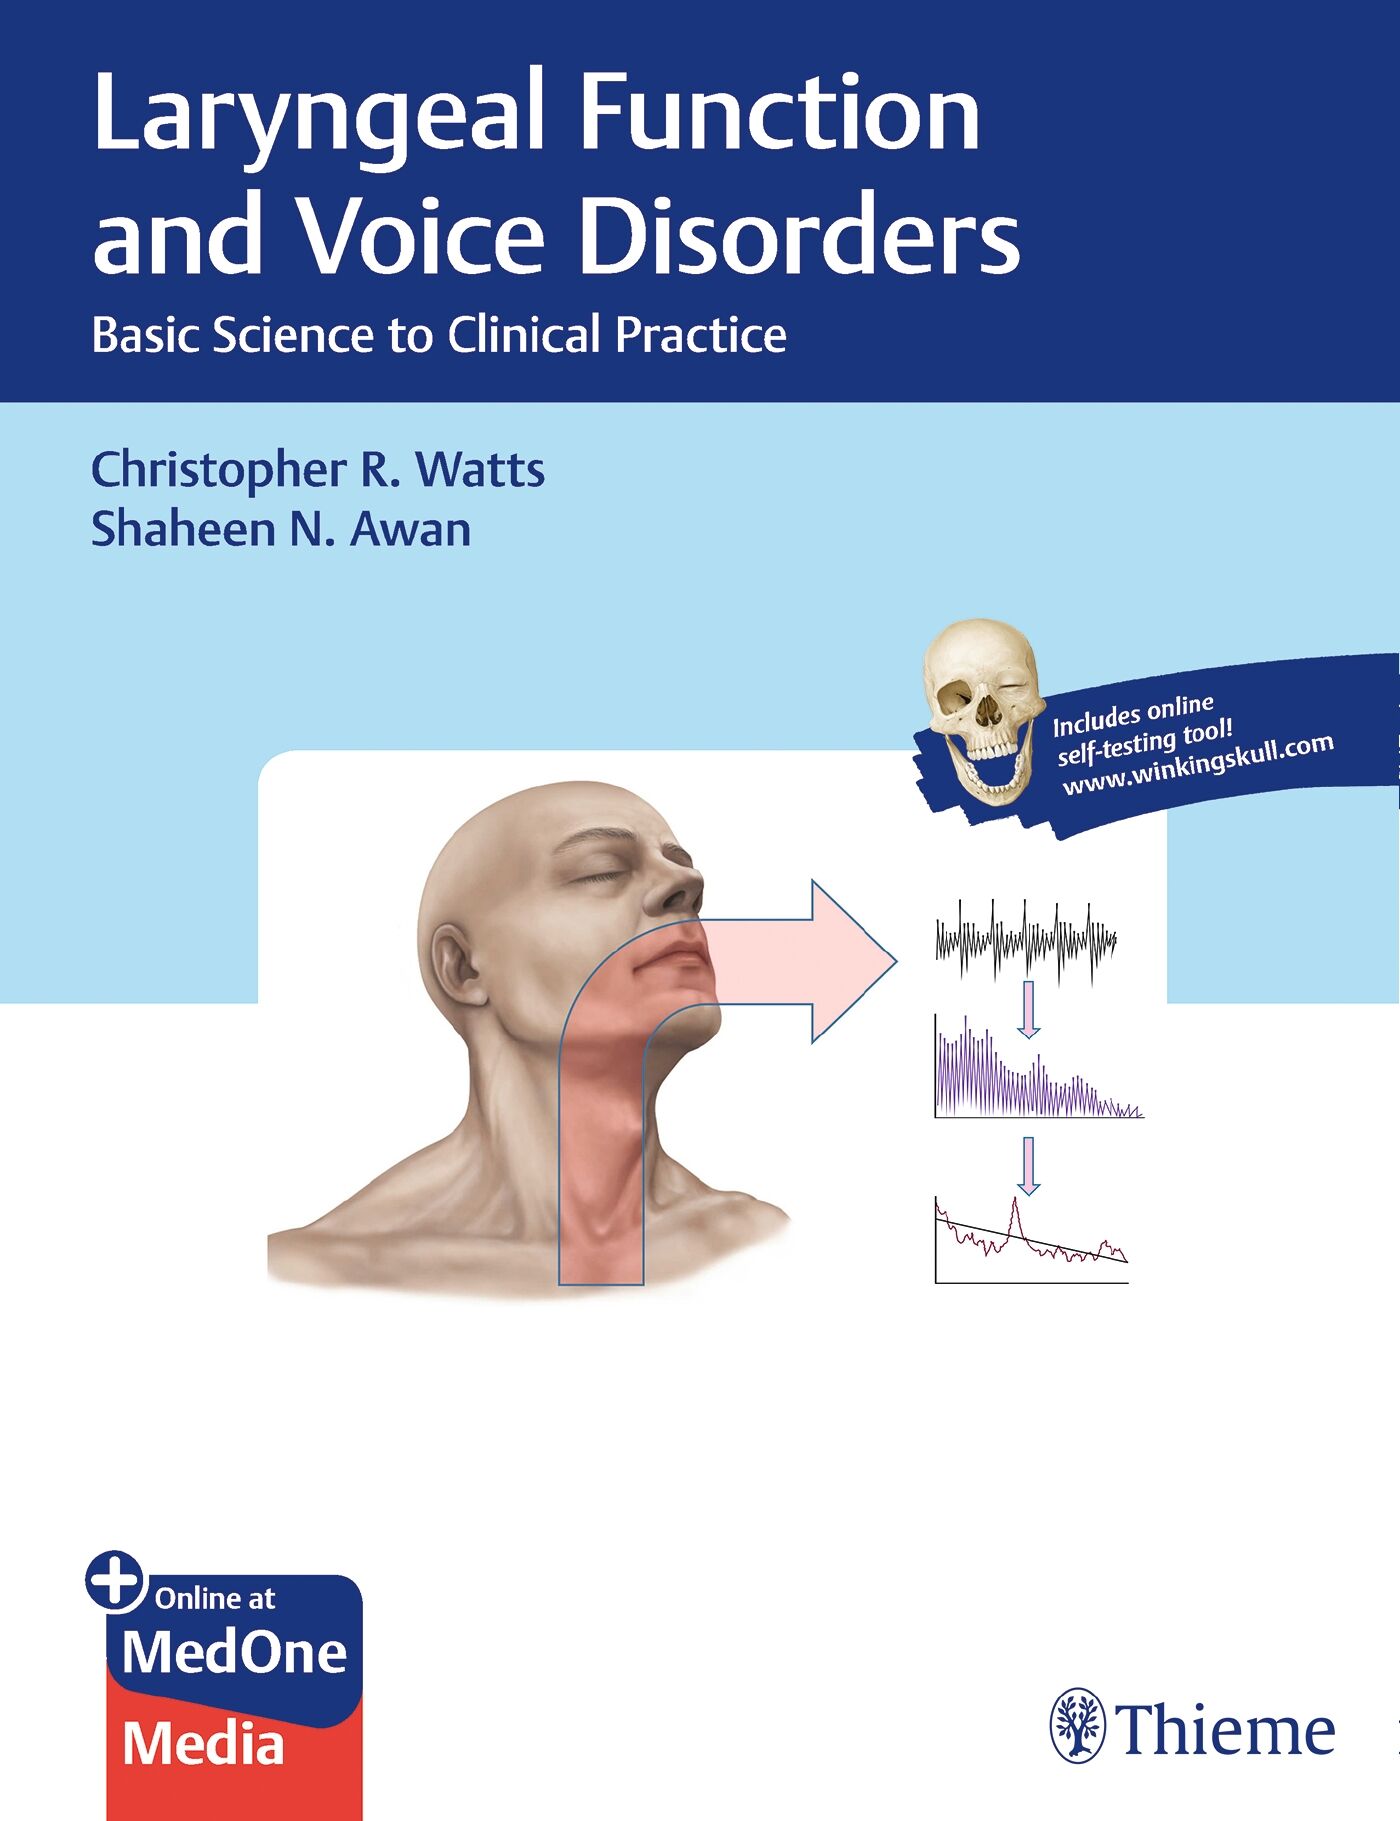 Laryngeal Function and Voice Disorders, 9781638534211